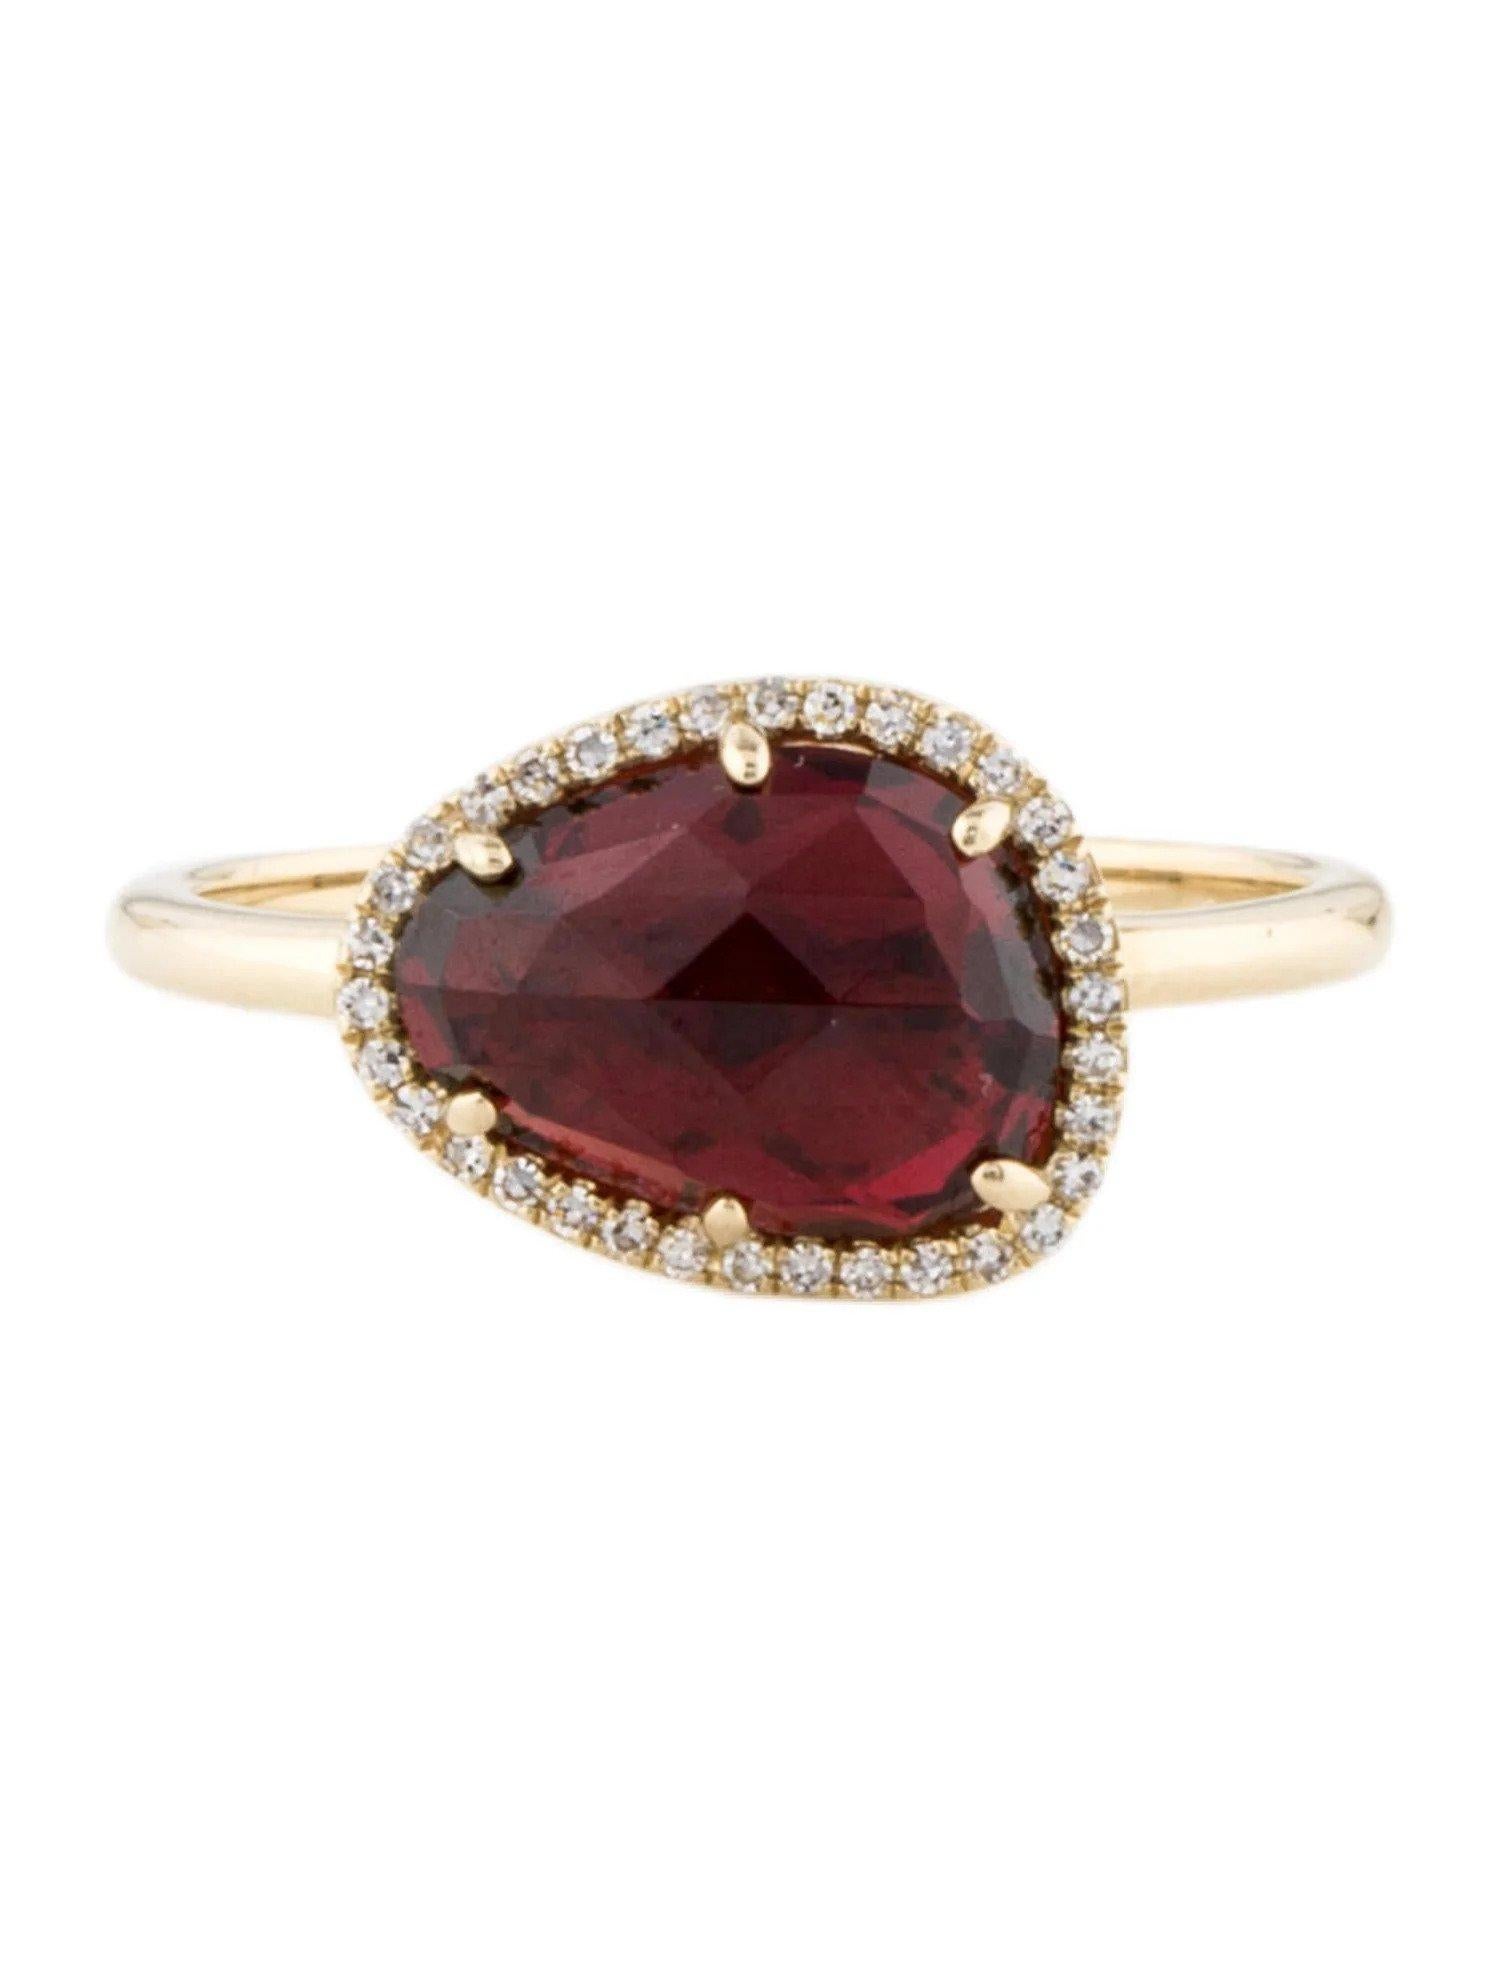 This Garnet & Diamond Ring is a stunning and timeless accessory that can add a touch of glamour and sophistication to any outfit. 

This ring features a 2.84 Carat Mixed Cut Garnet (12 x 9 MM), with a Diamond Halo comprised of 0.08 Carats of Single